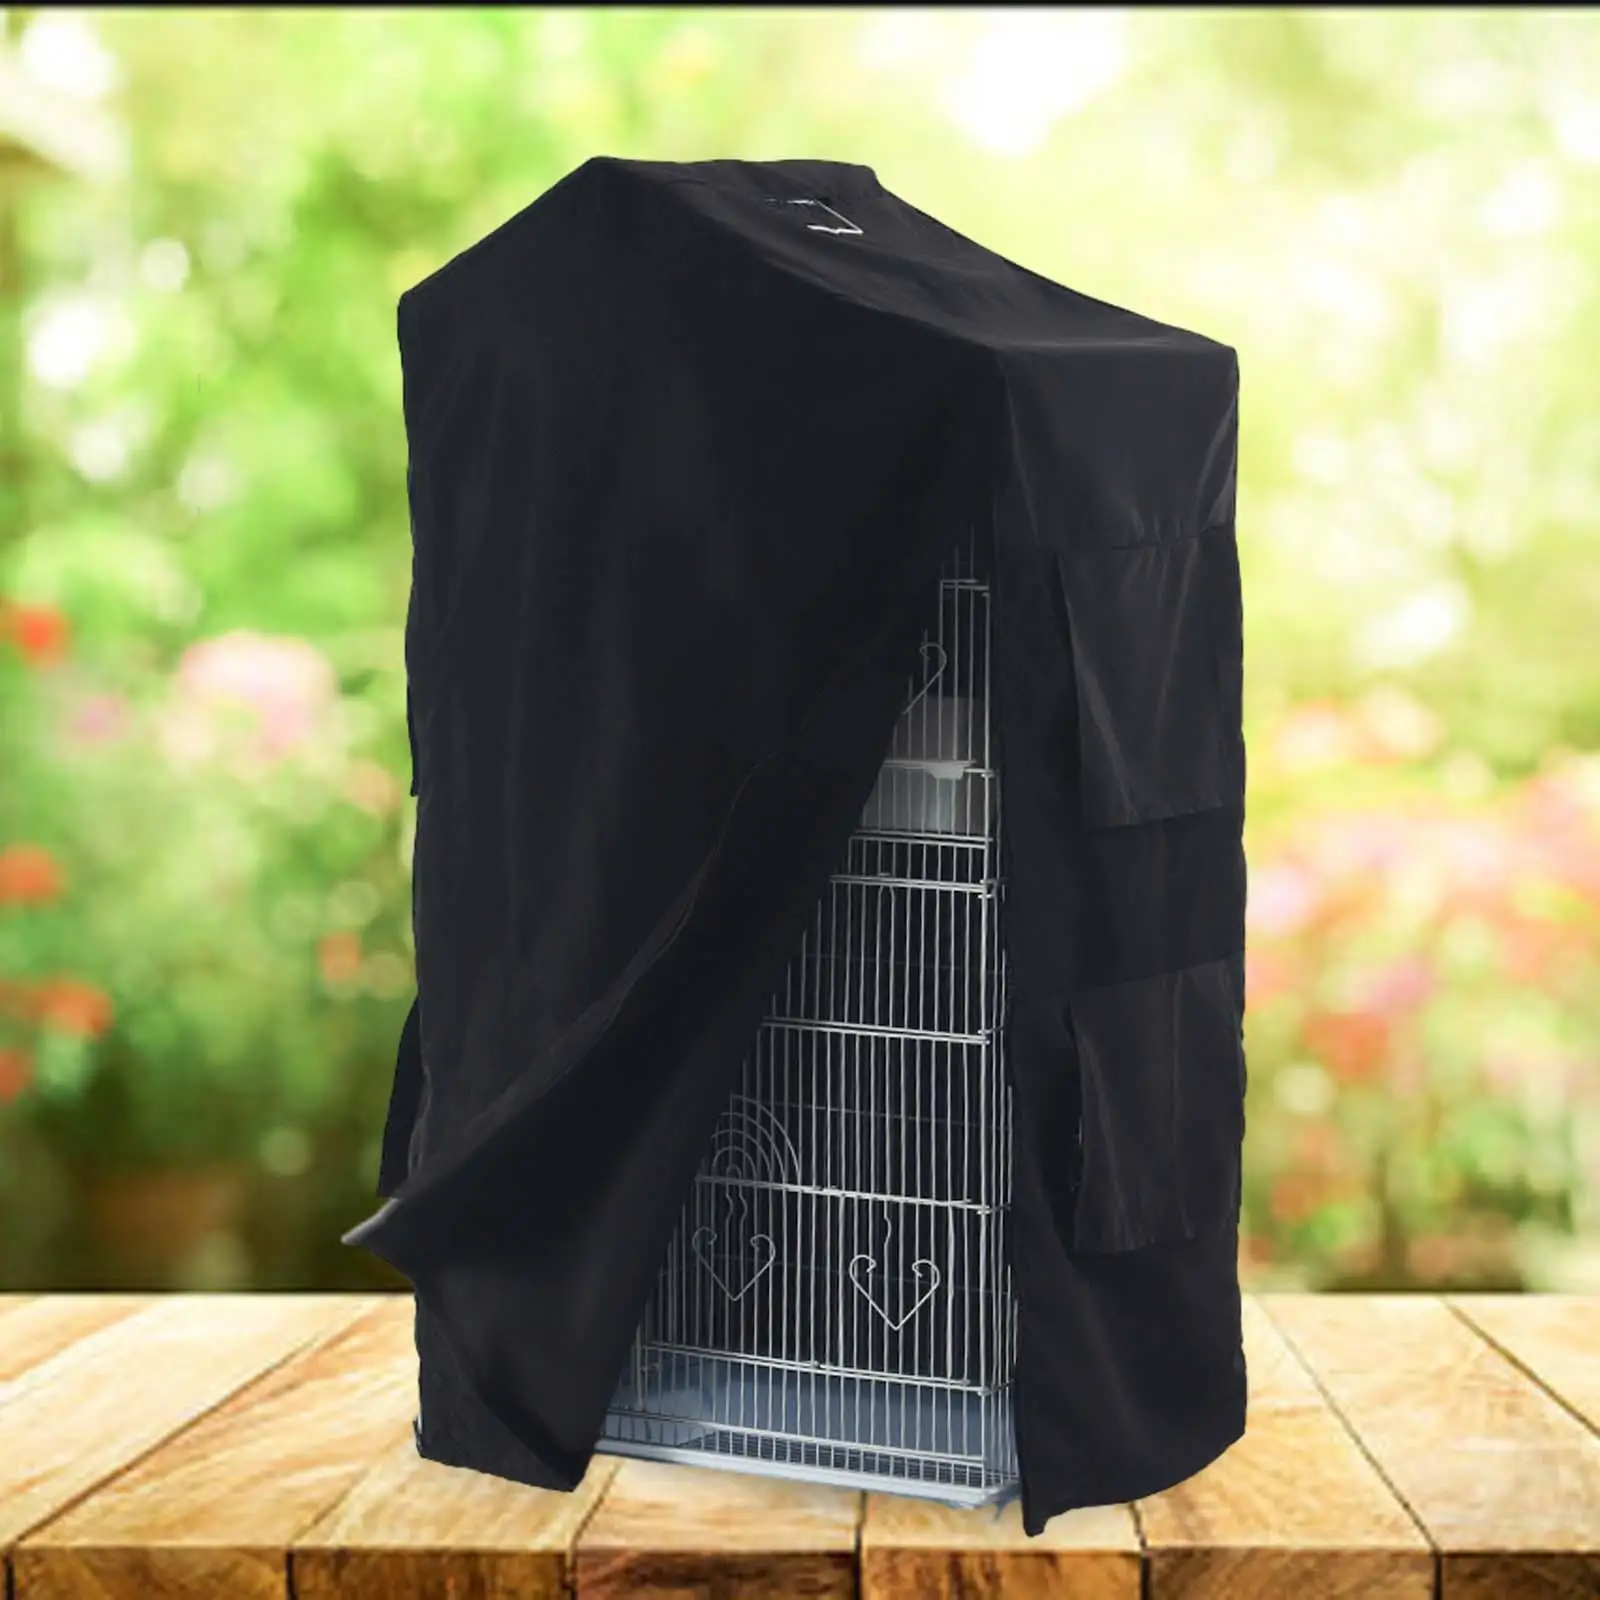 Bird Cage Cover Waterproof Blackout Cover for Lovebirds Parrot Accessories